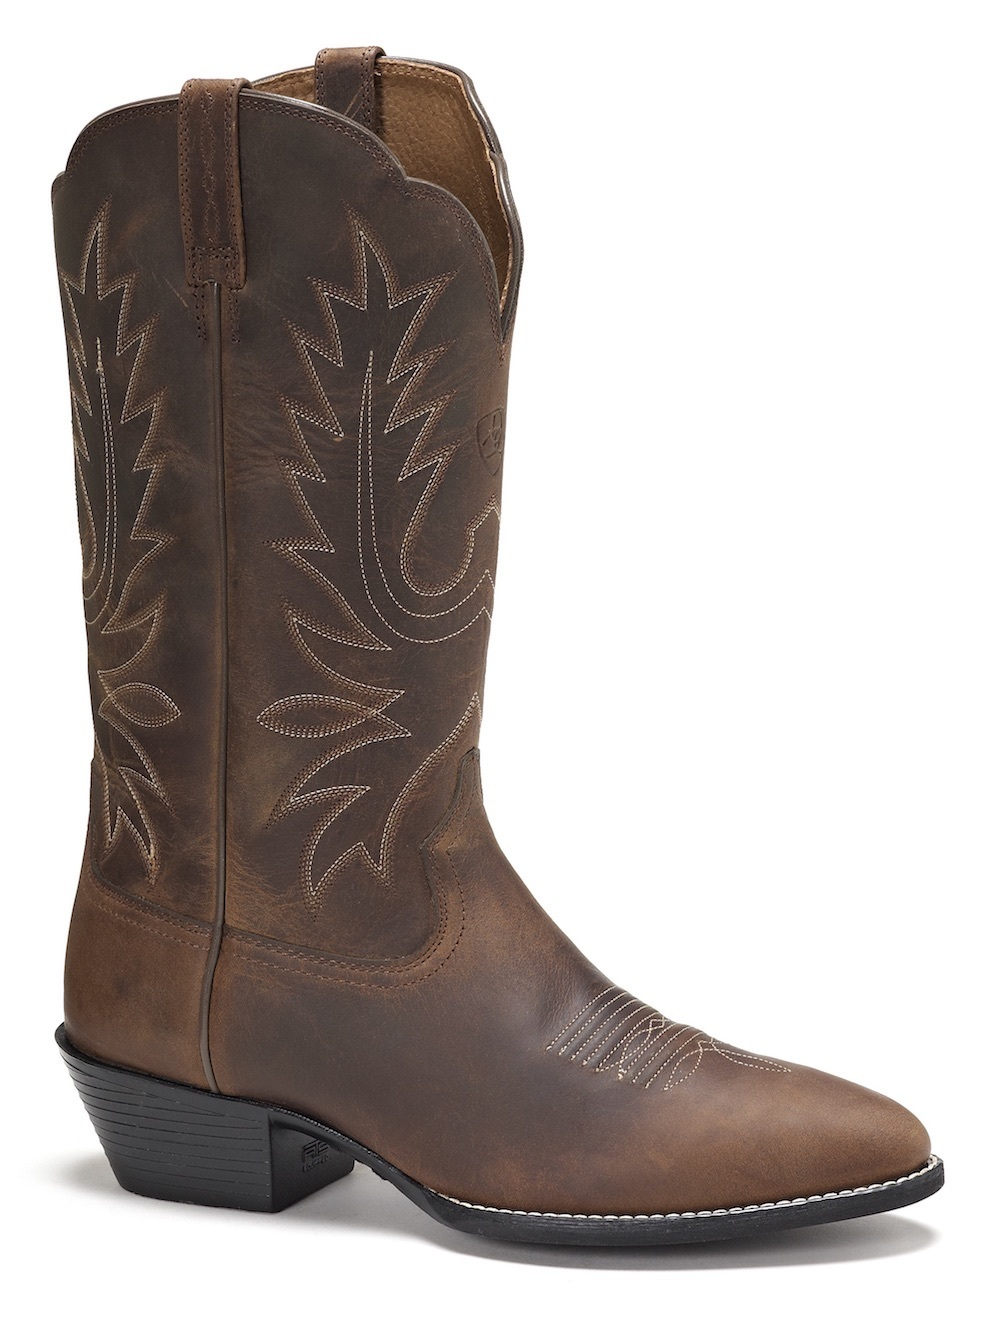 Women's Cowgirl Boots | Afterpay \u0026 Free 